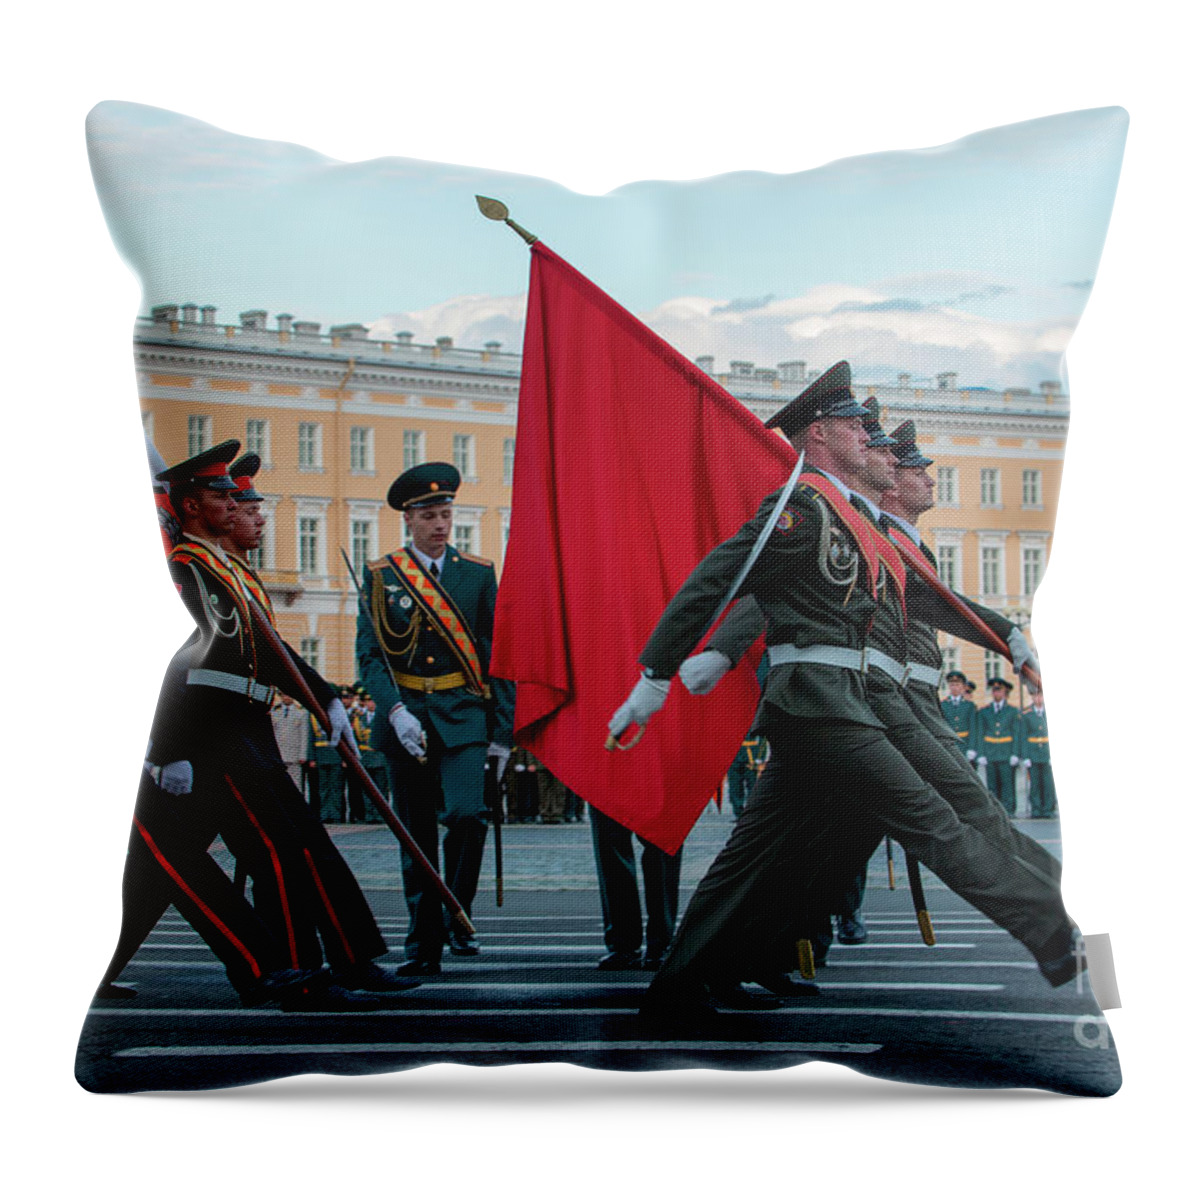 Marching Throw Pillow featuring the photograph Military Parade On Palace Square by Holger Leue